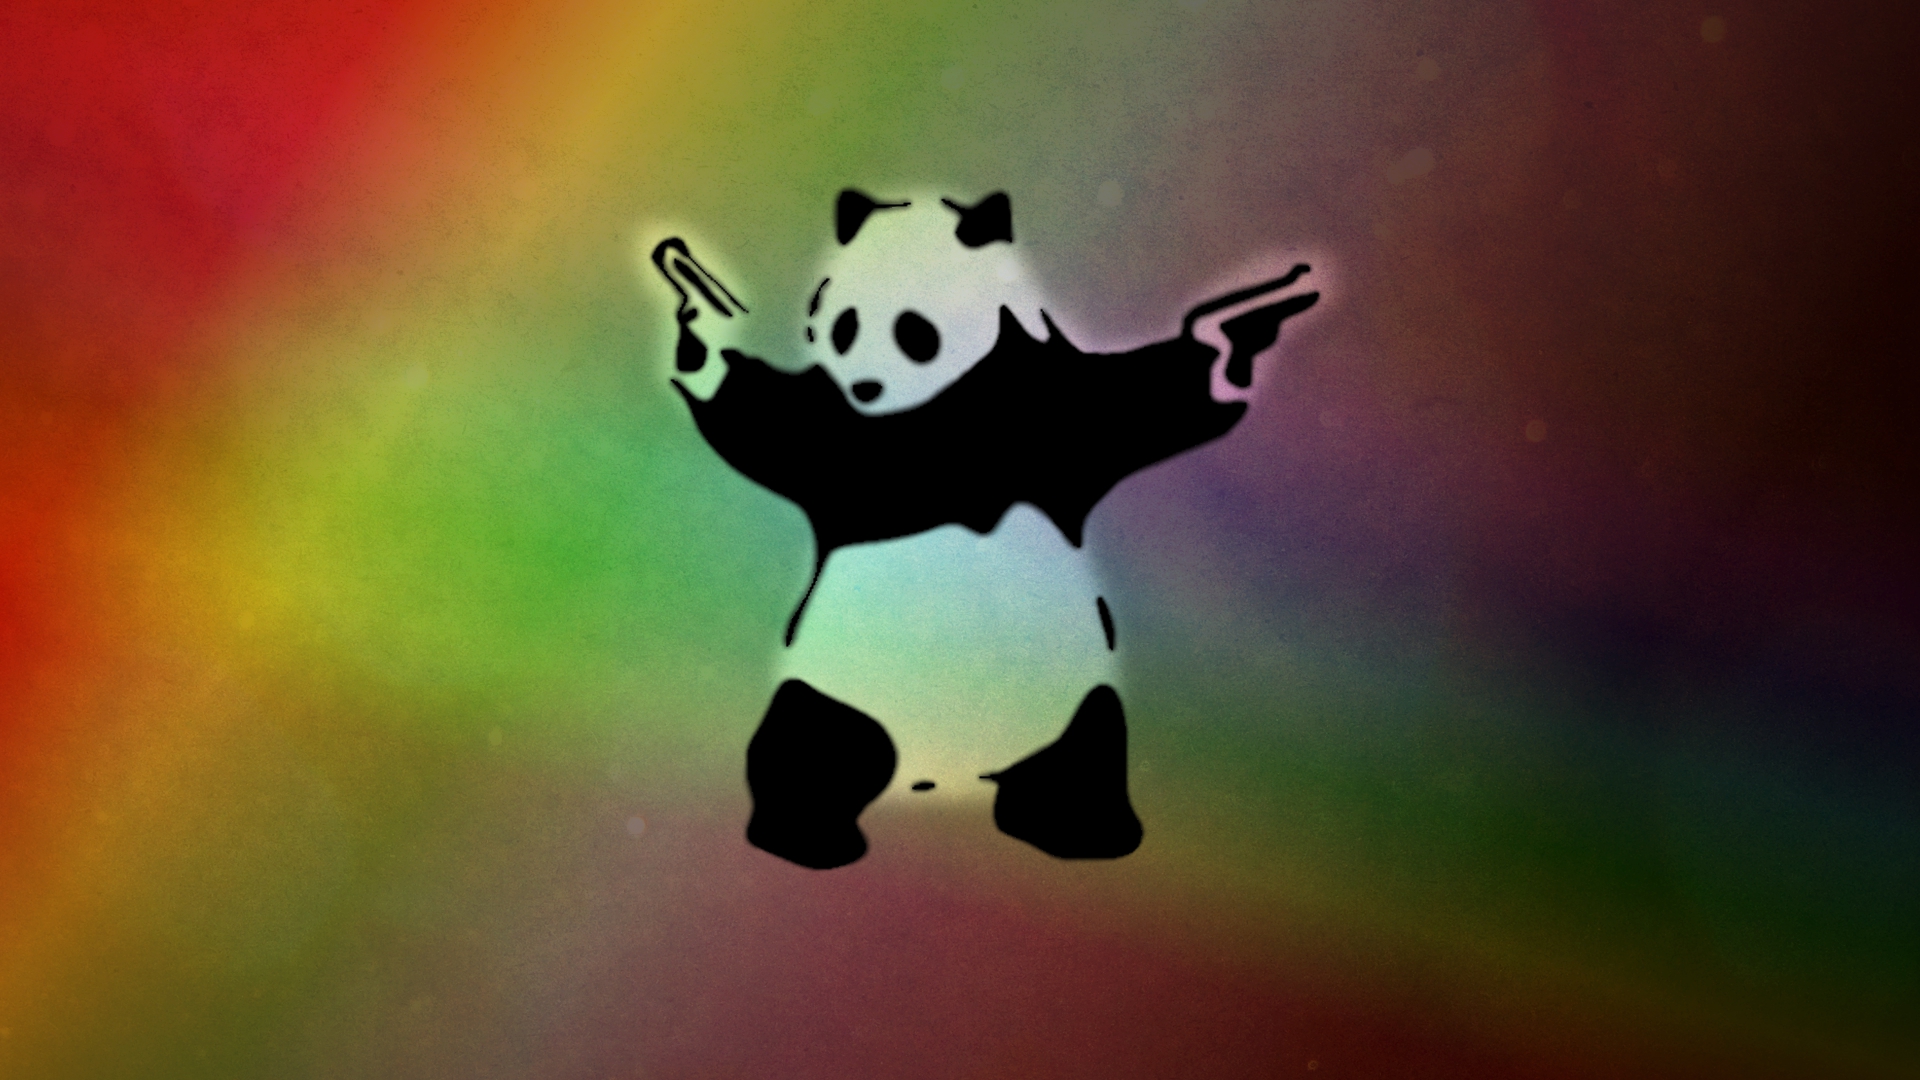 Bad-Panda Background 1920x1080 by toddy2cool on DeviantArt